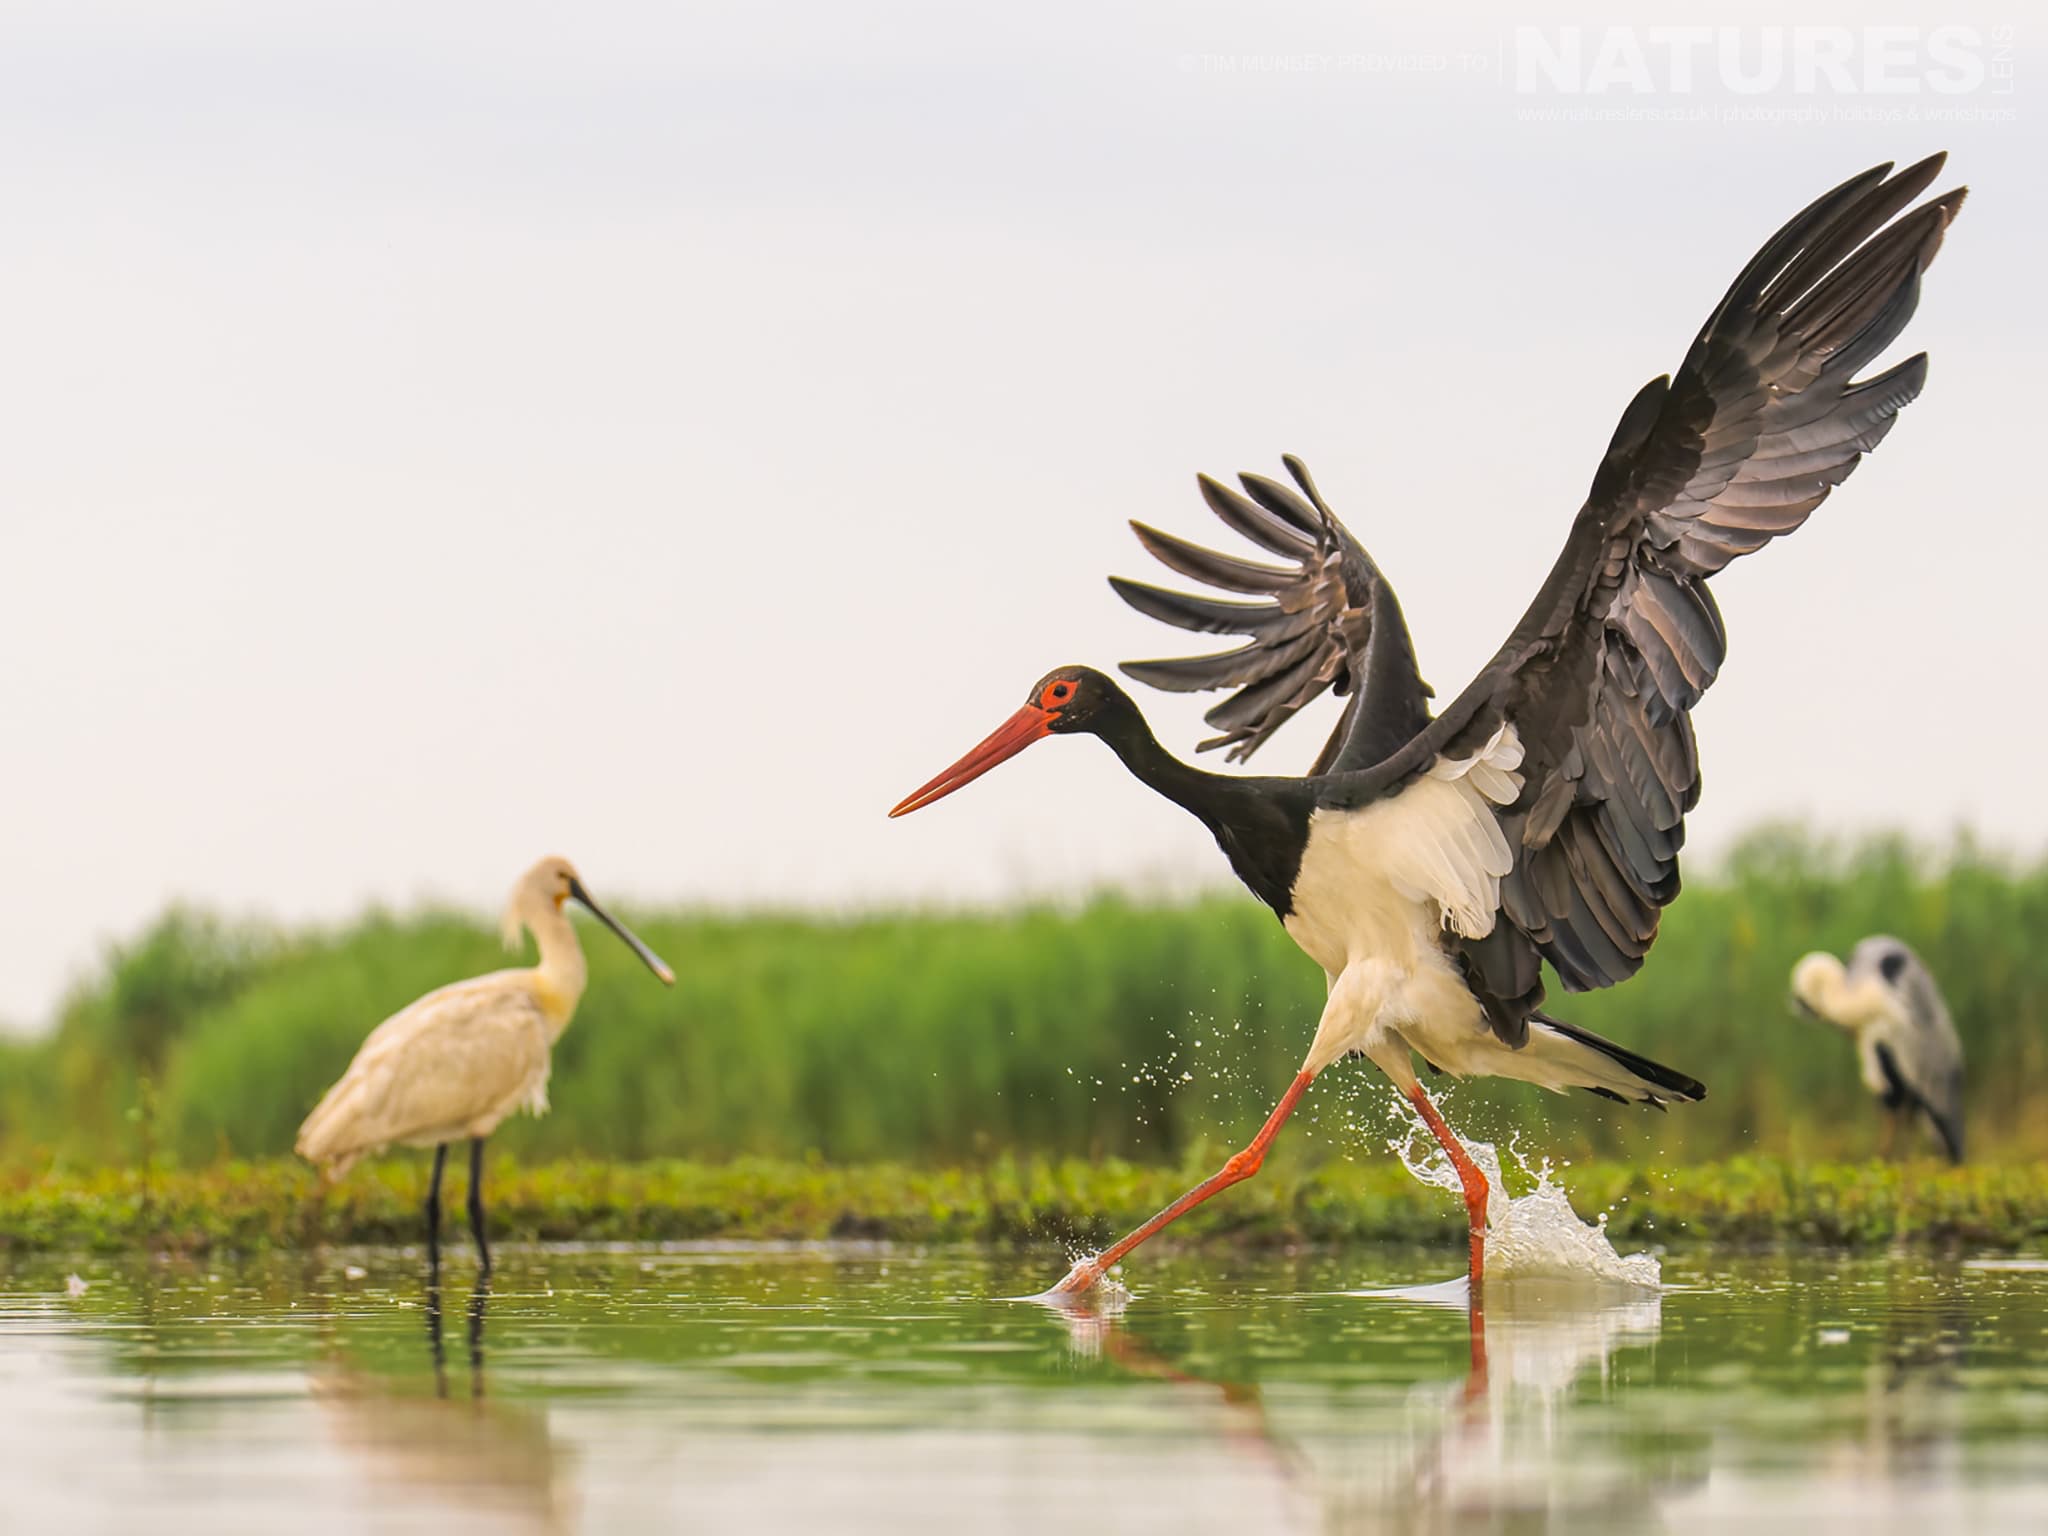 A Black Stork Runs Through One Of The Ponds With Eurasian Spoonbills Behind Photographed At Bence Máté's Hides In Hungary During A Natureslens Wildlife Photography Holiday